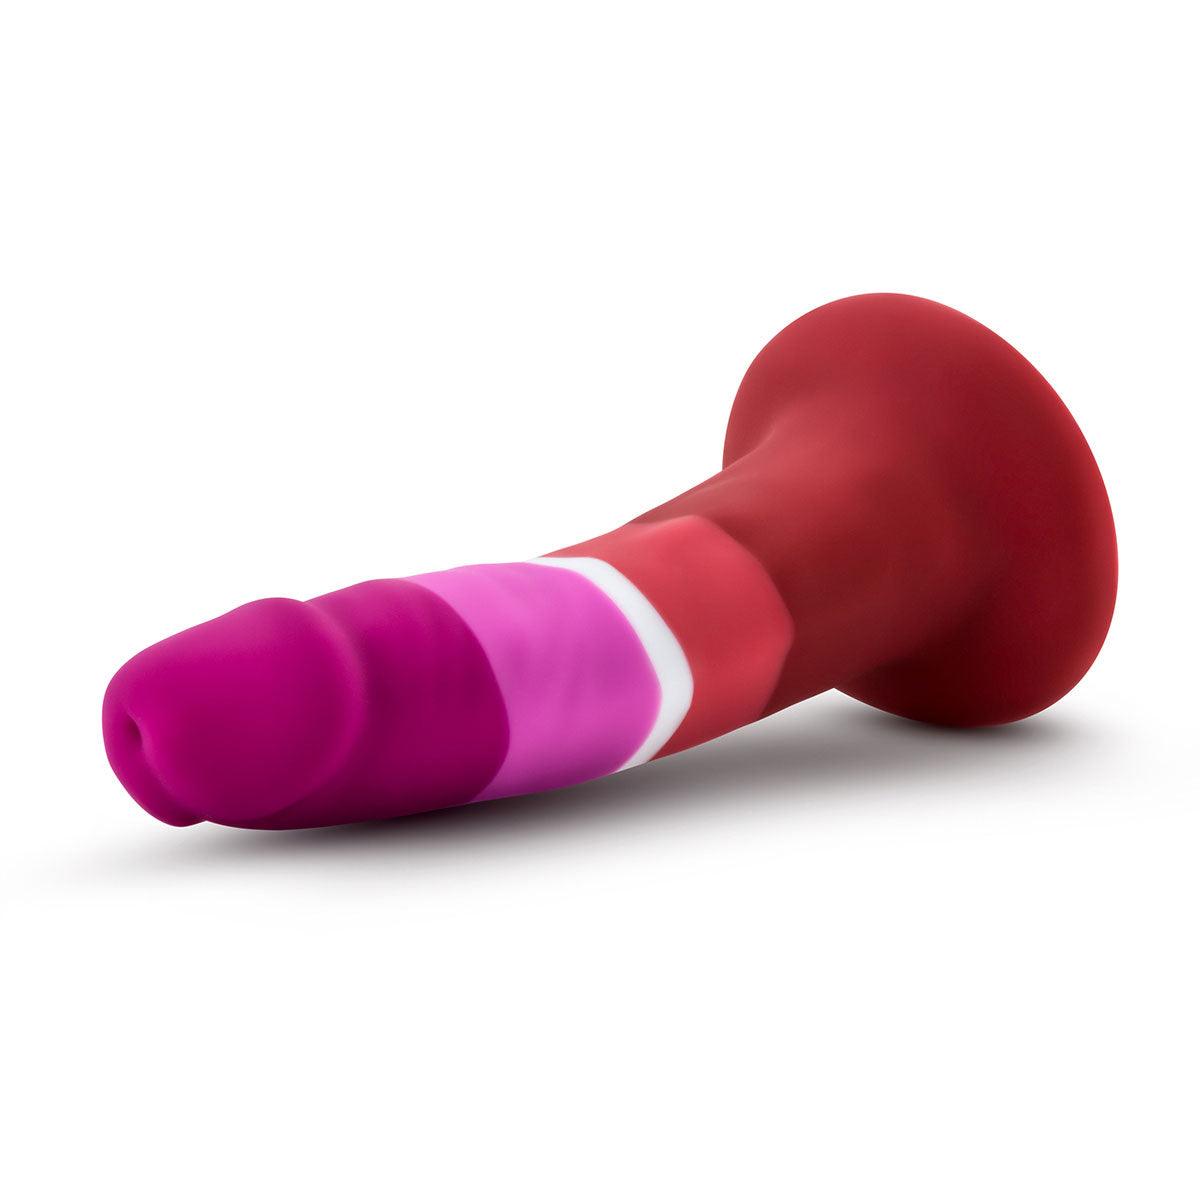 Avant Pride P3 Lesbian - Buy At Luxury Toy X - Free 3-Day Shipping